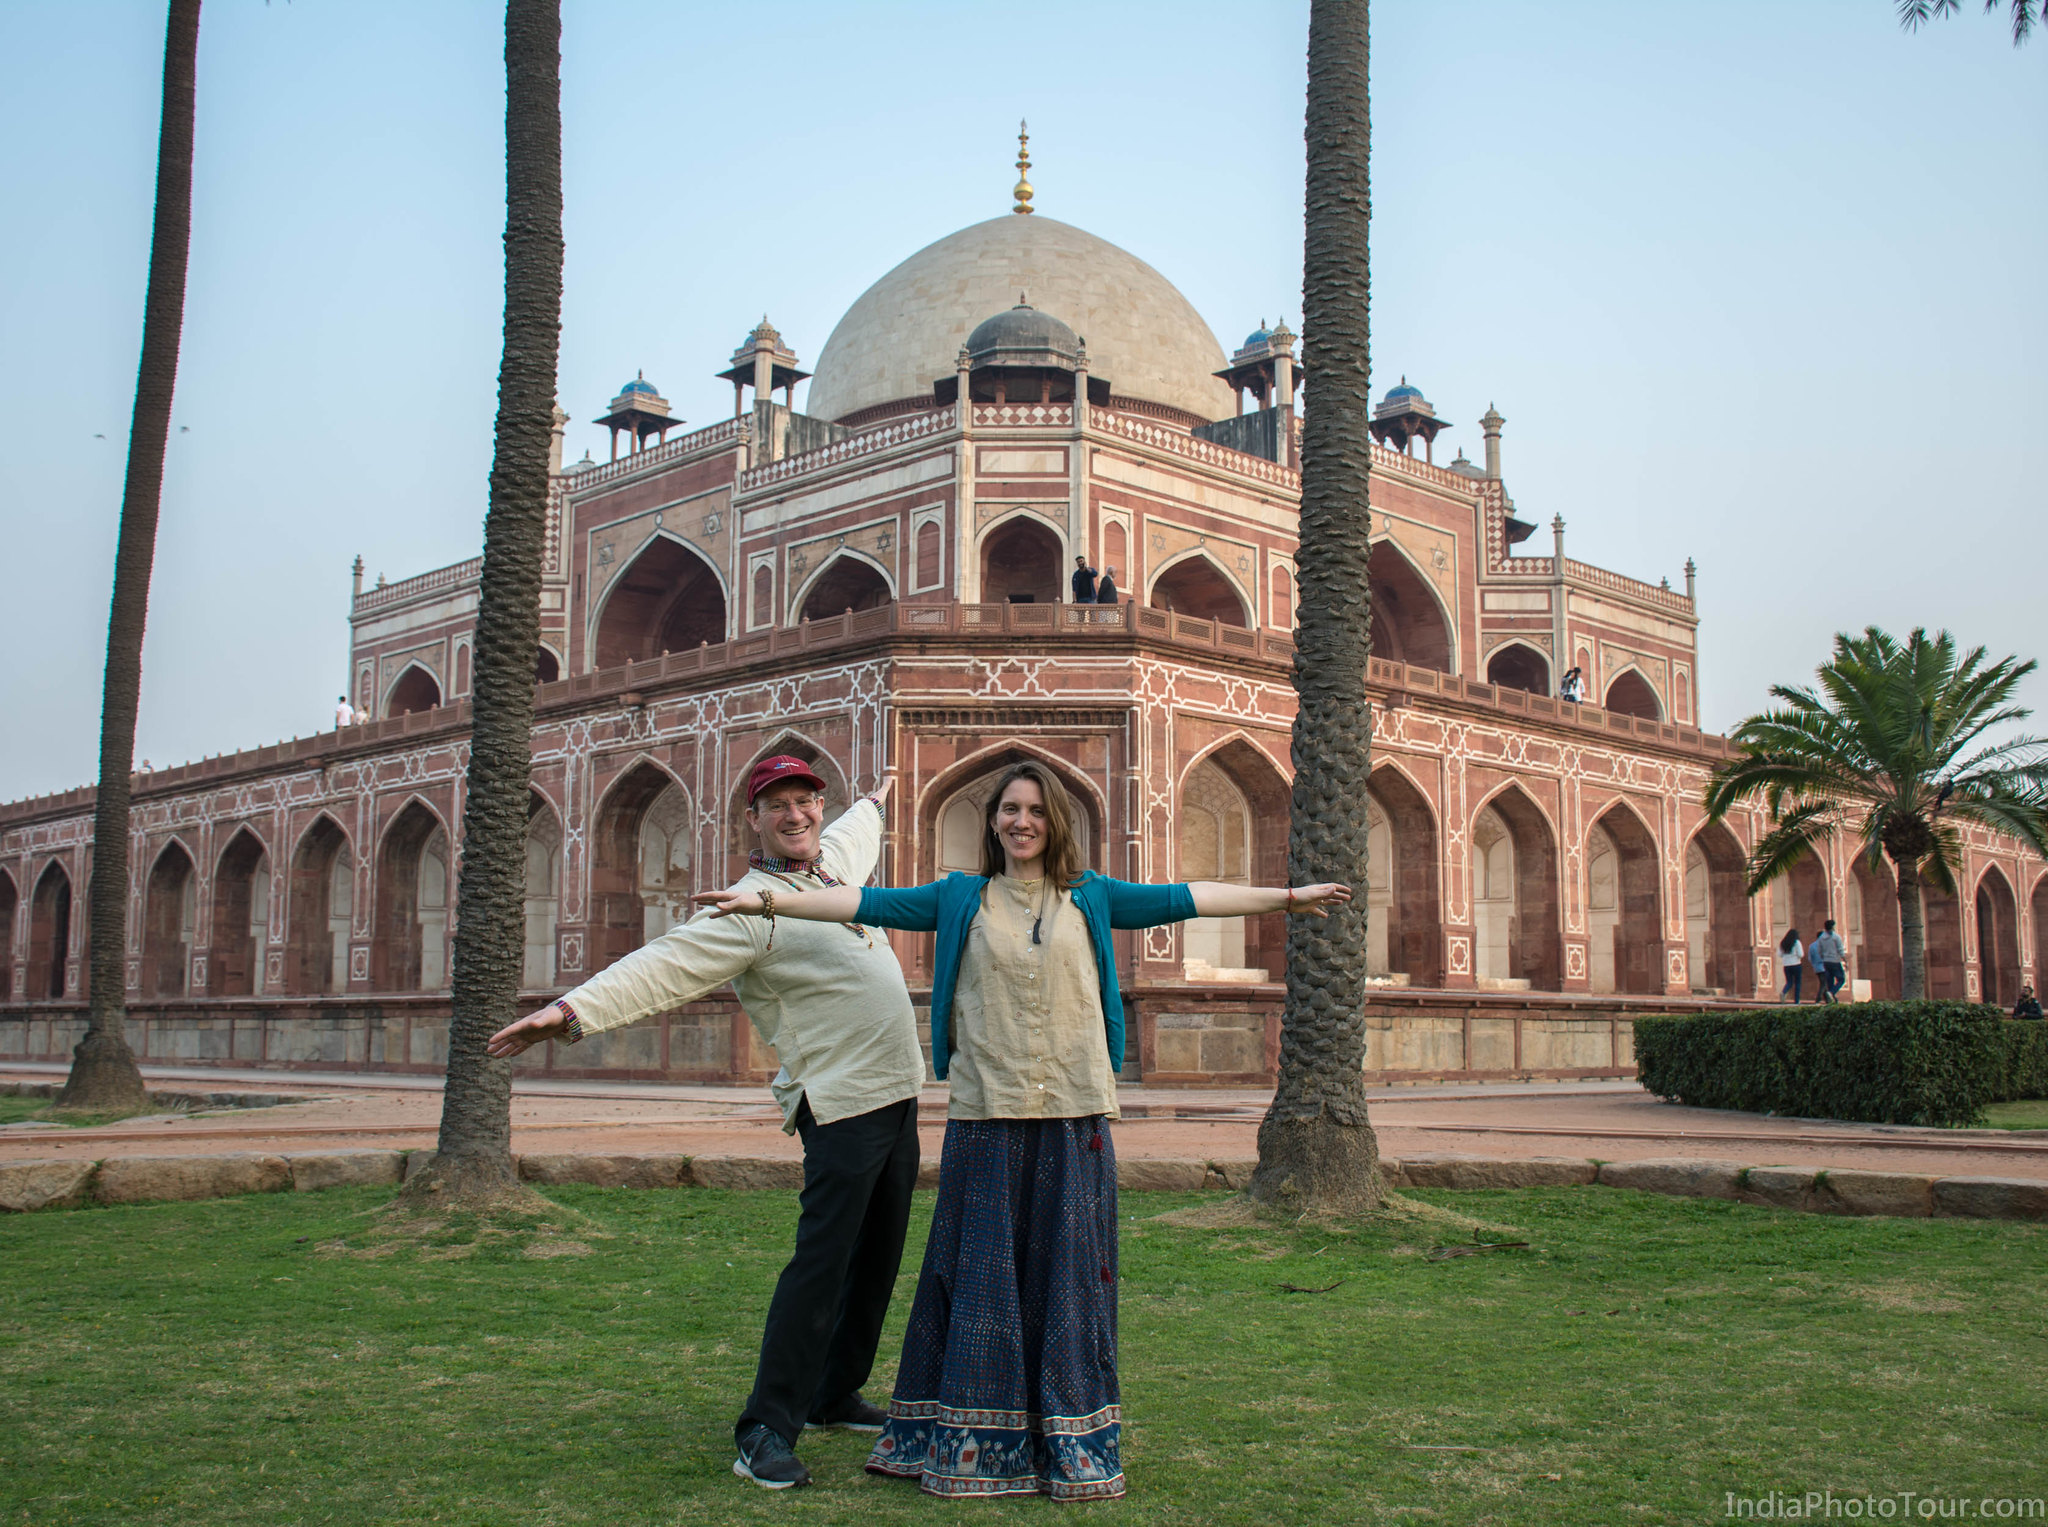 Some fun in front of Humayun's tomb